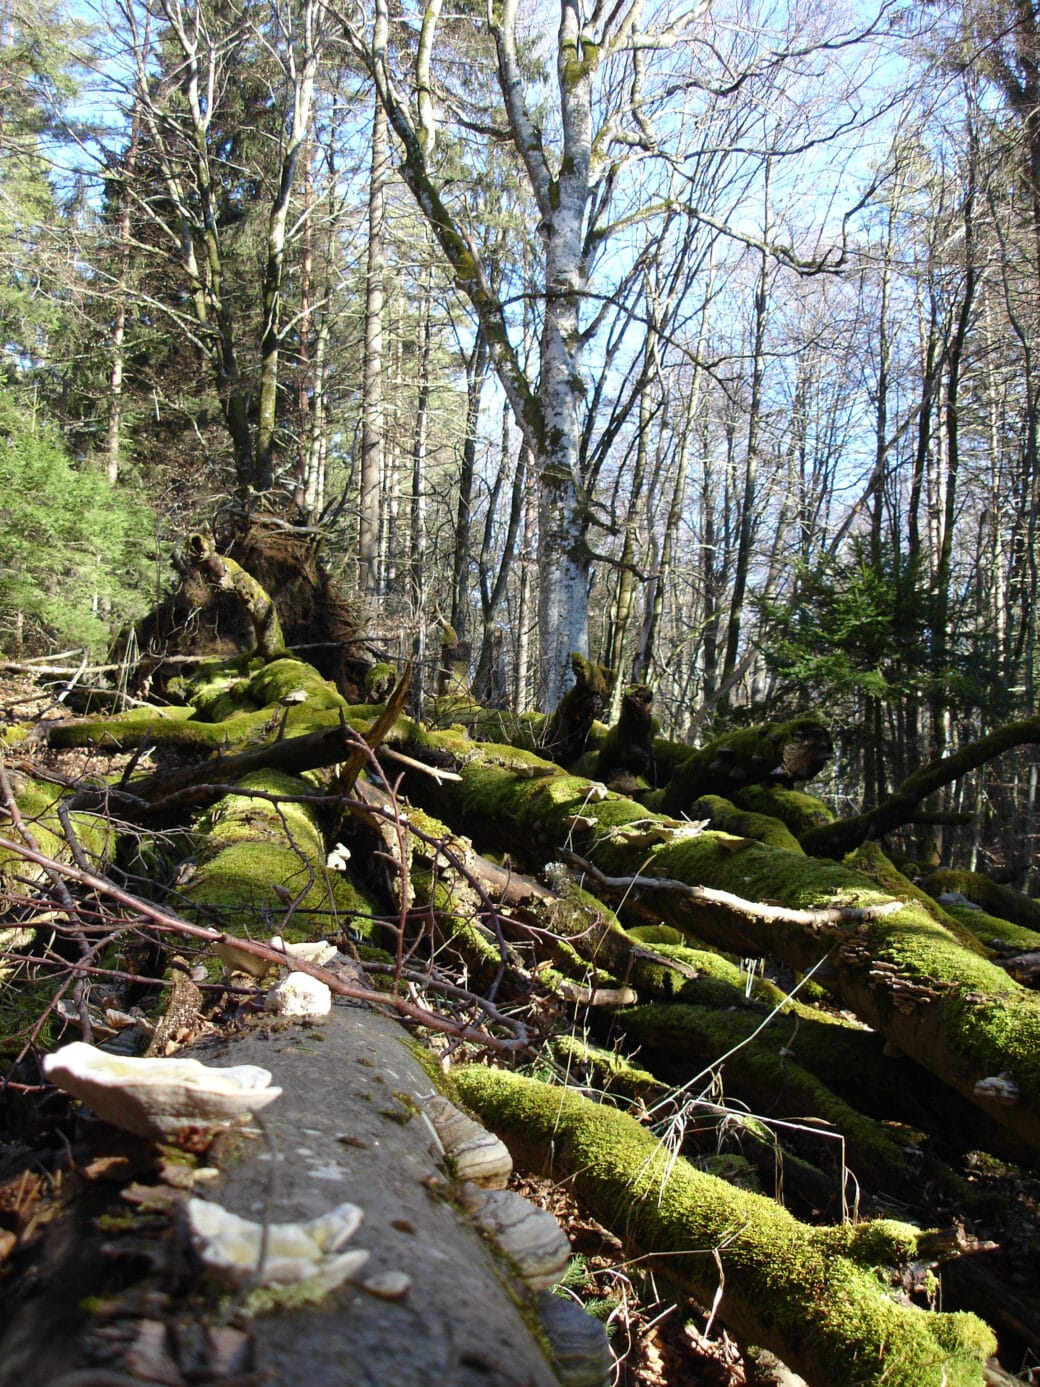 Picture: The photo shows a sunlit, undefoliated forest. In the foreground are several logs and branches of fungus- and moss-covered deadwood. In the center of the photo is a large birch tree. In the background are spruce and beech trees.